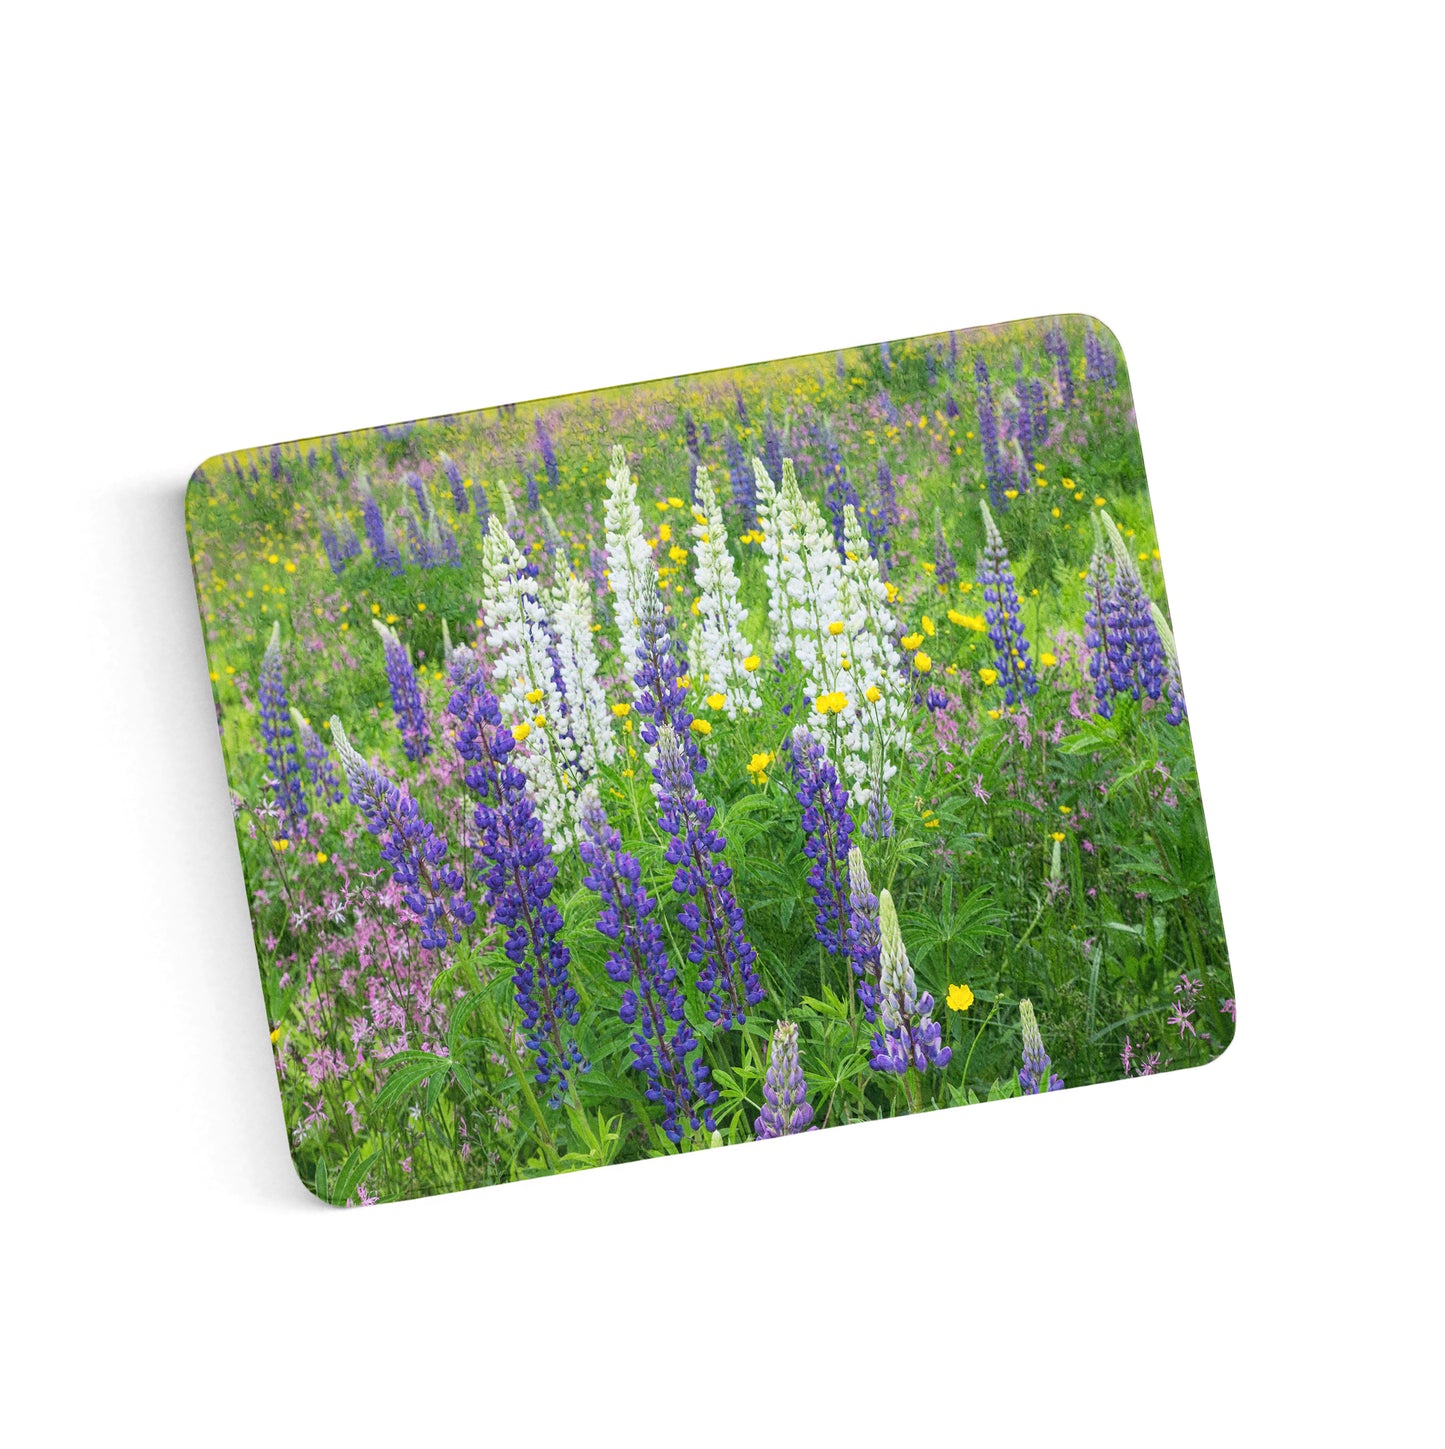 Lupine Bouquet Cutting Board by Chris Whiton